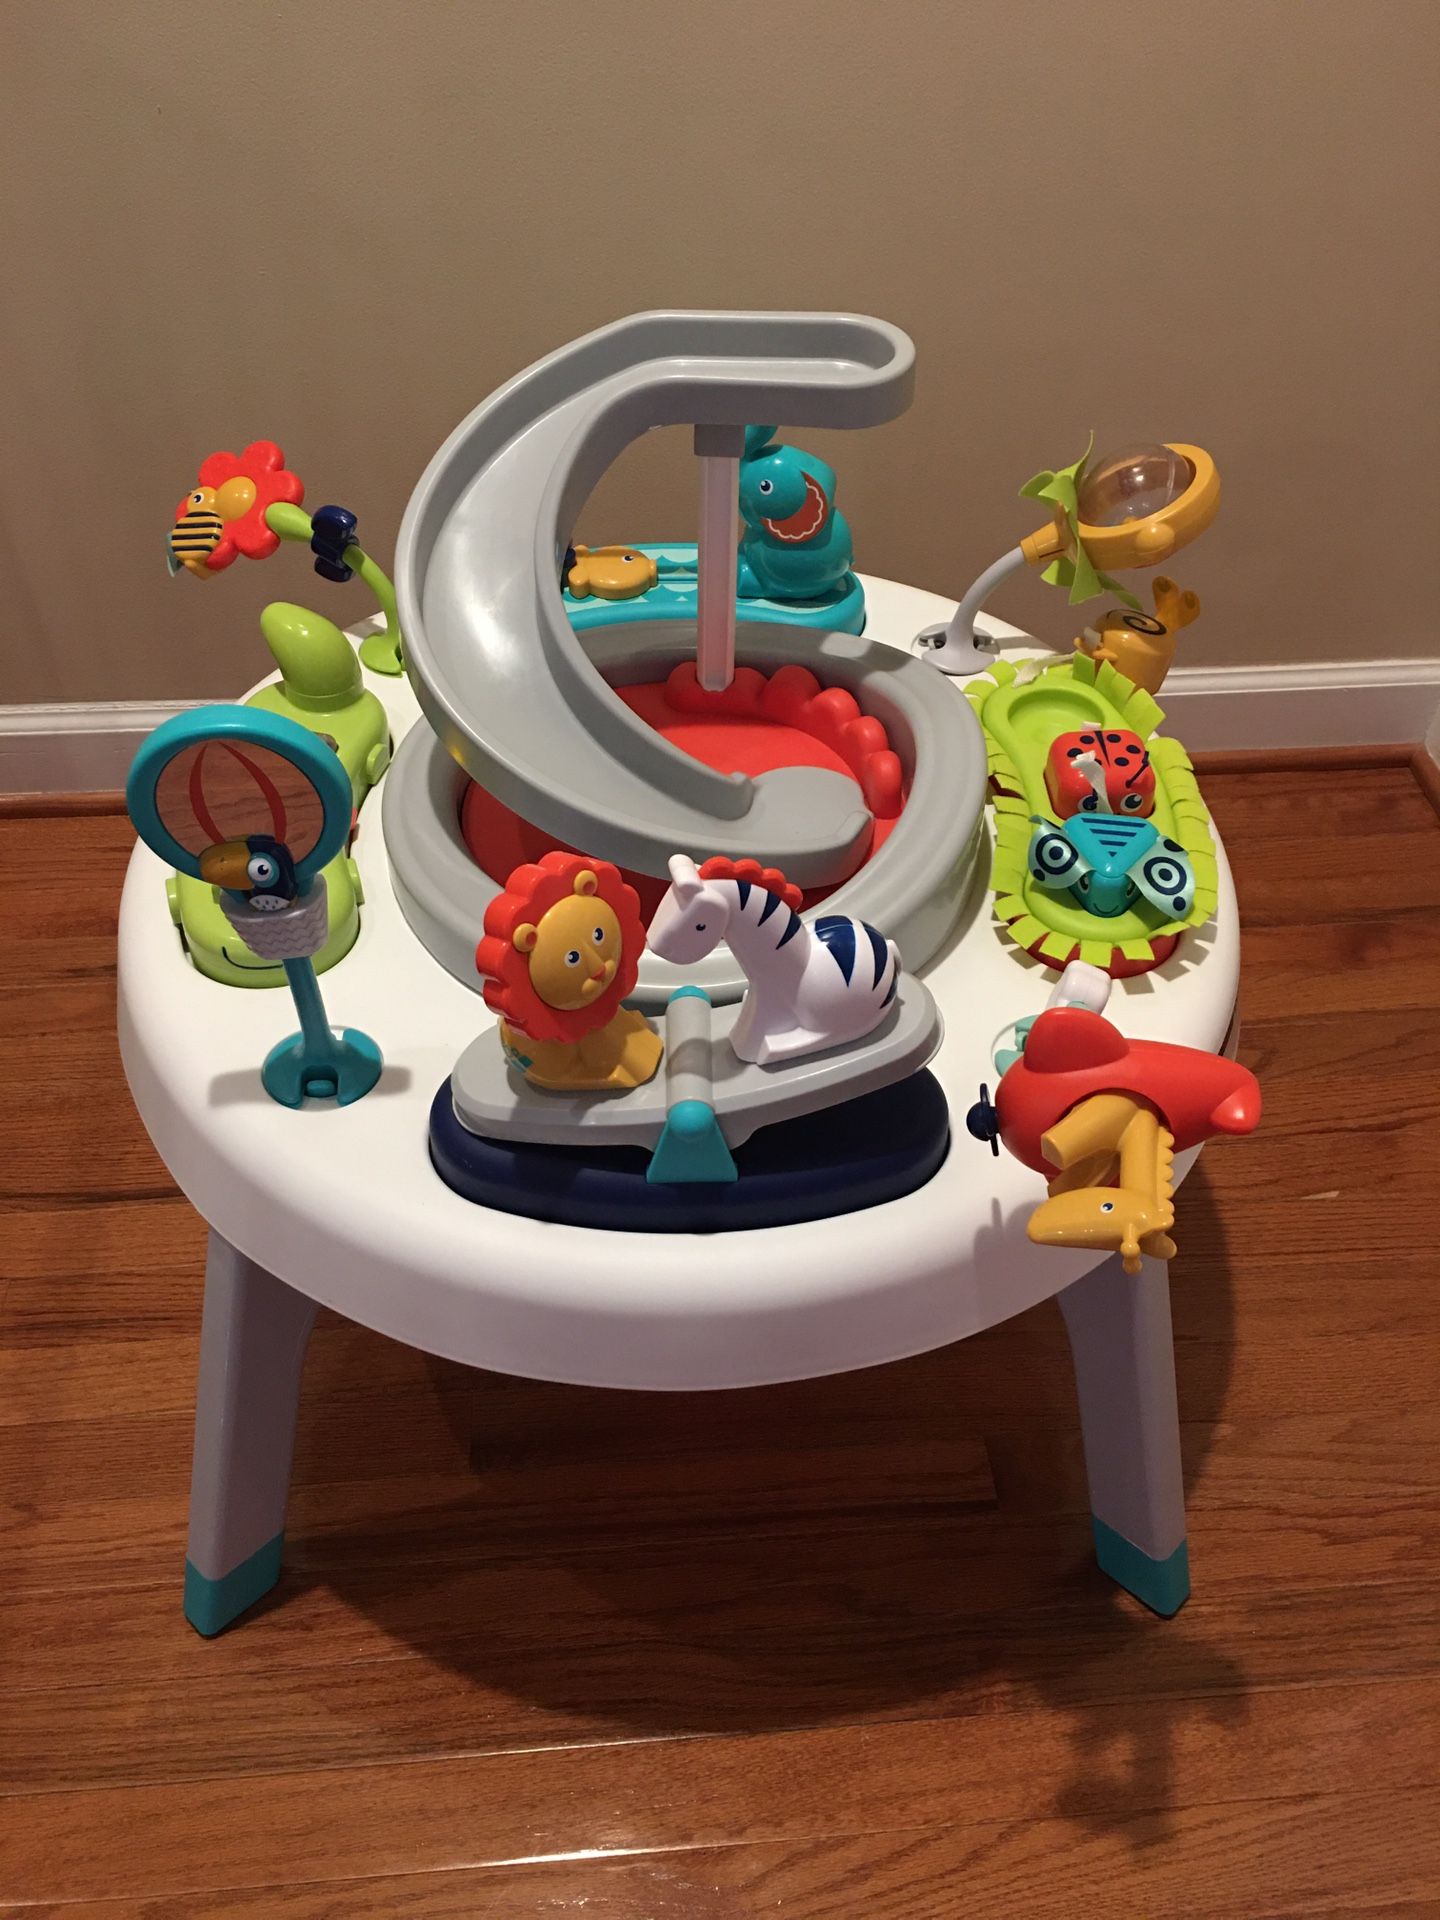 Fisher-Price 2-in-1 Sit-to-Stand Activity Center Spin ‘n Play Safari